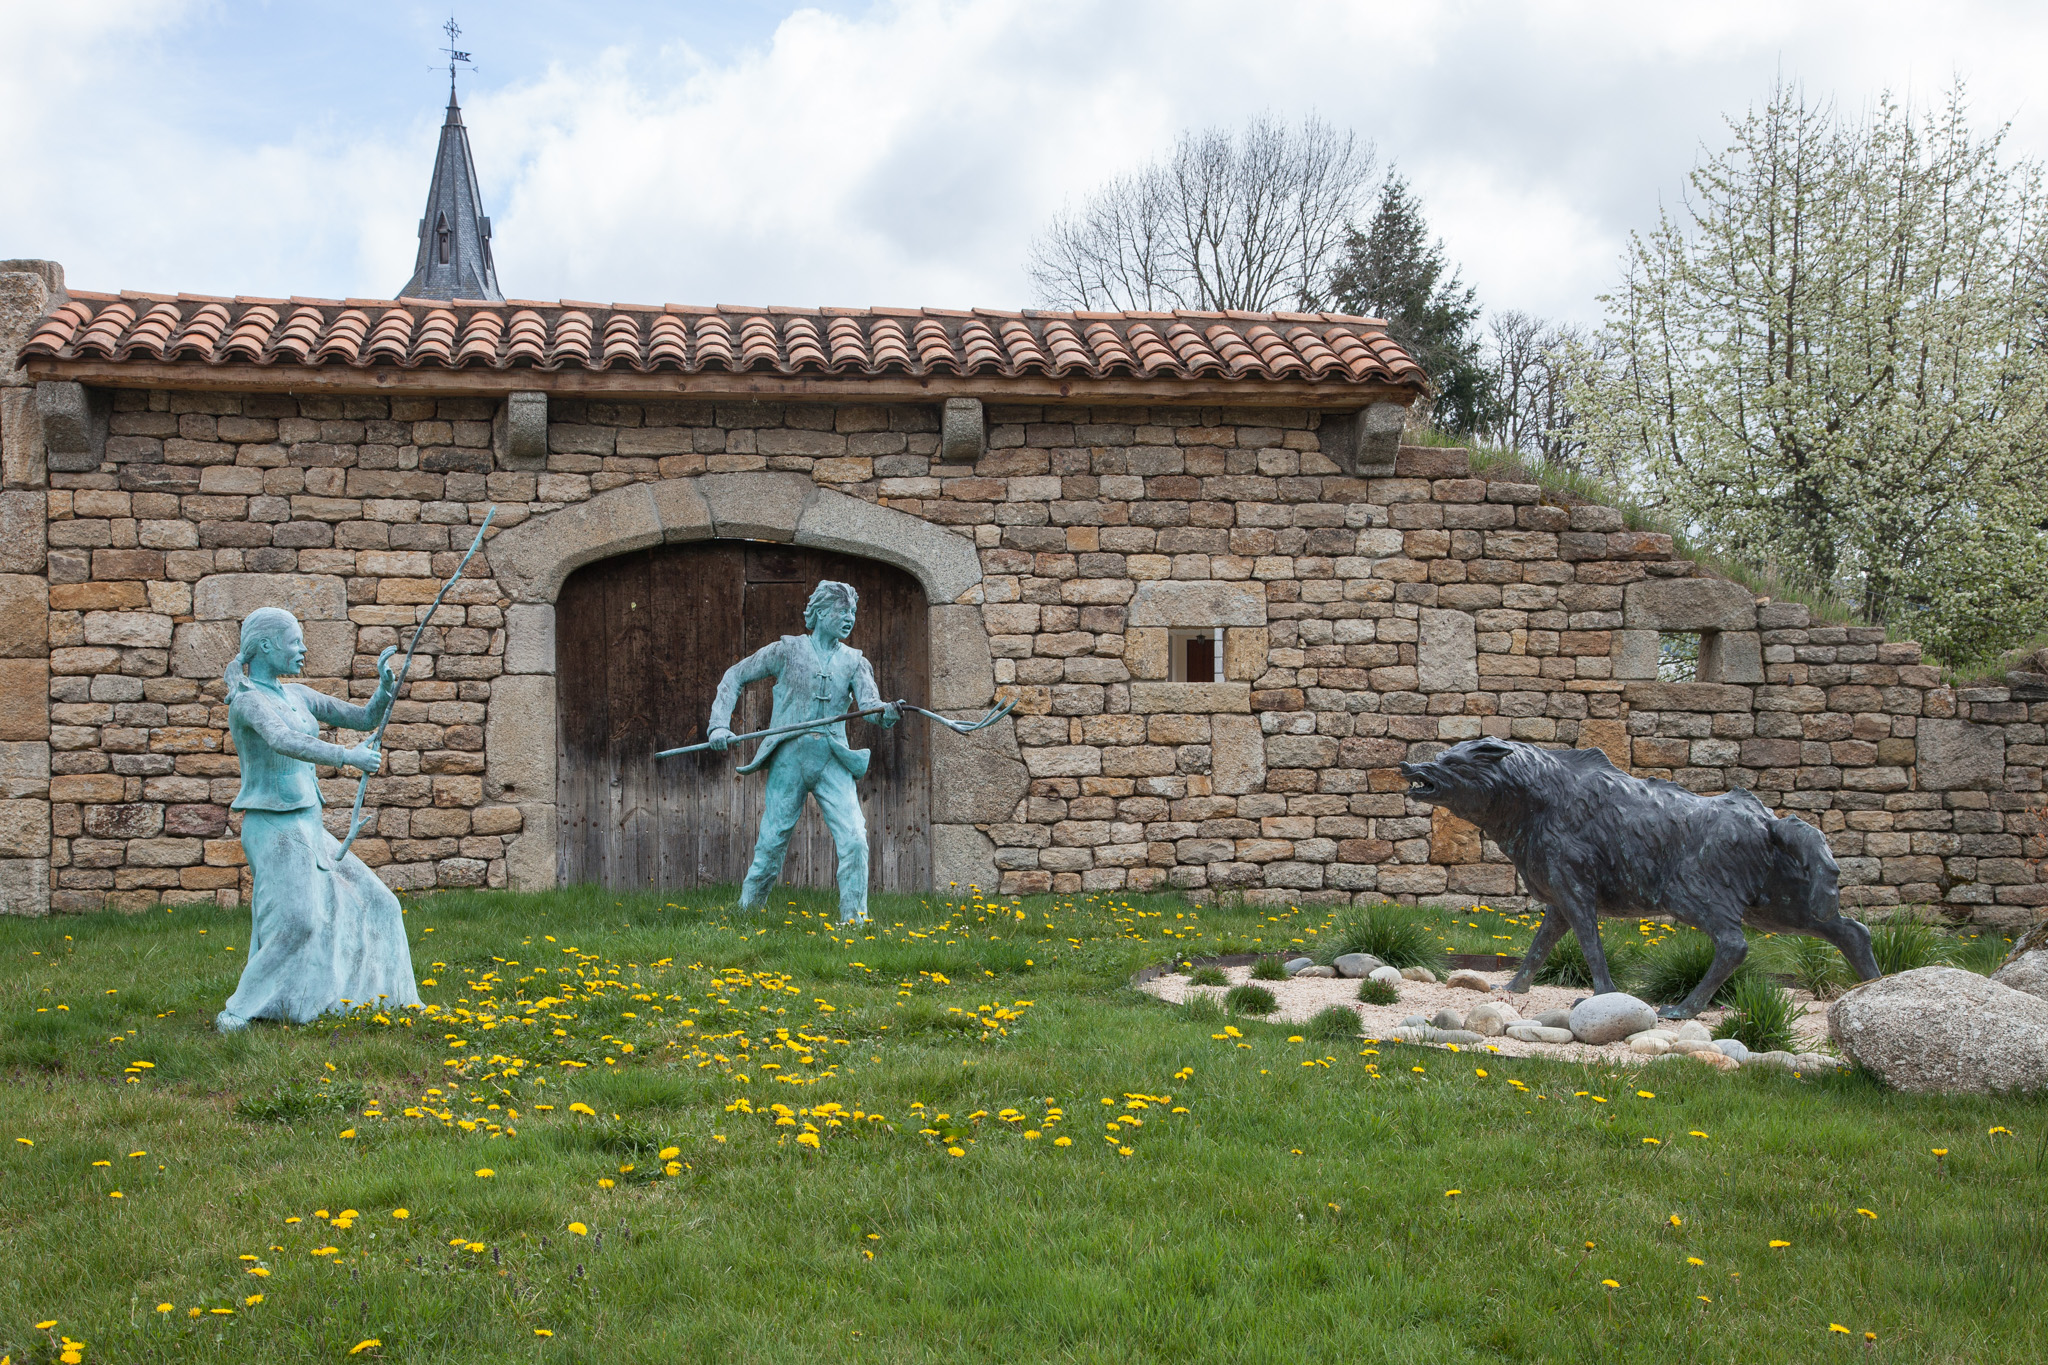 Two copper statues of peasants defend themselves from the Beast of Gévaudan.